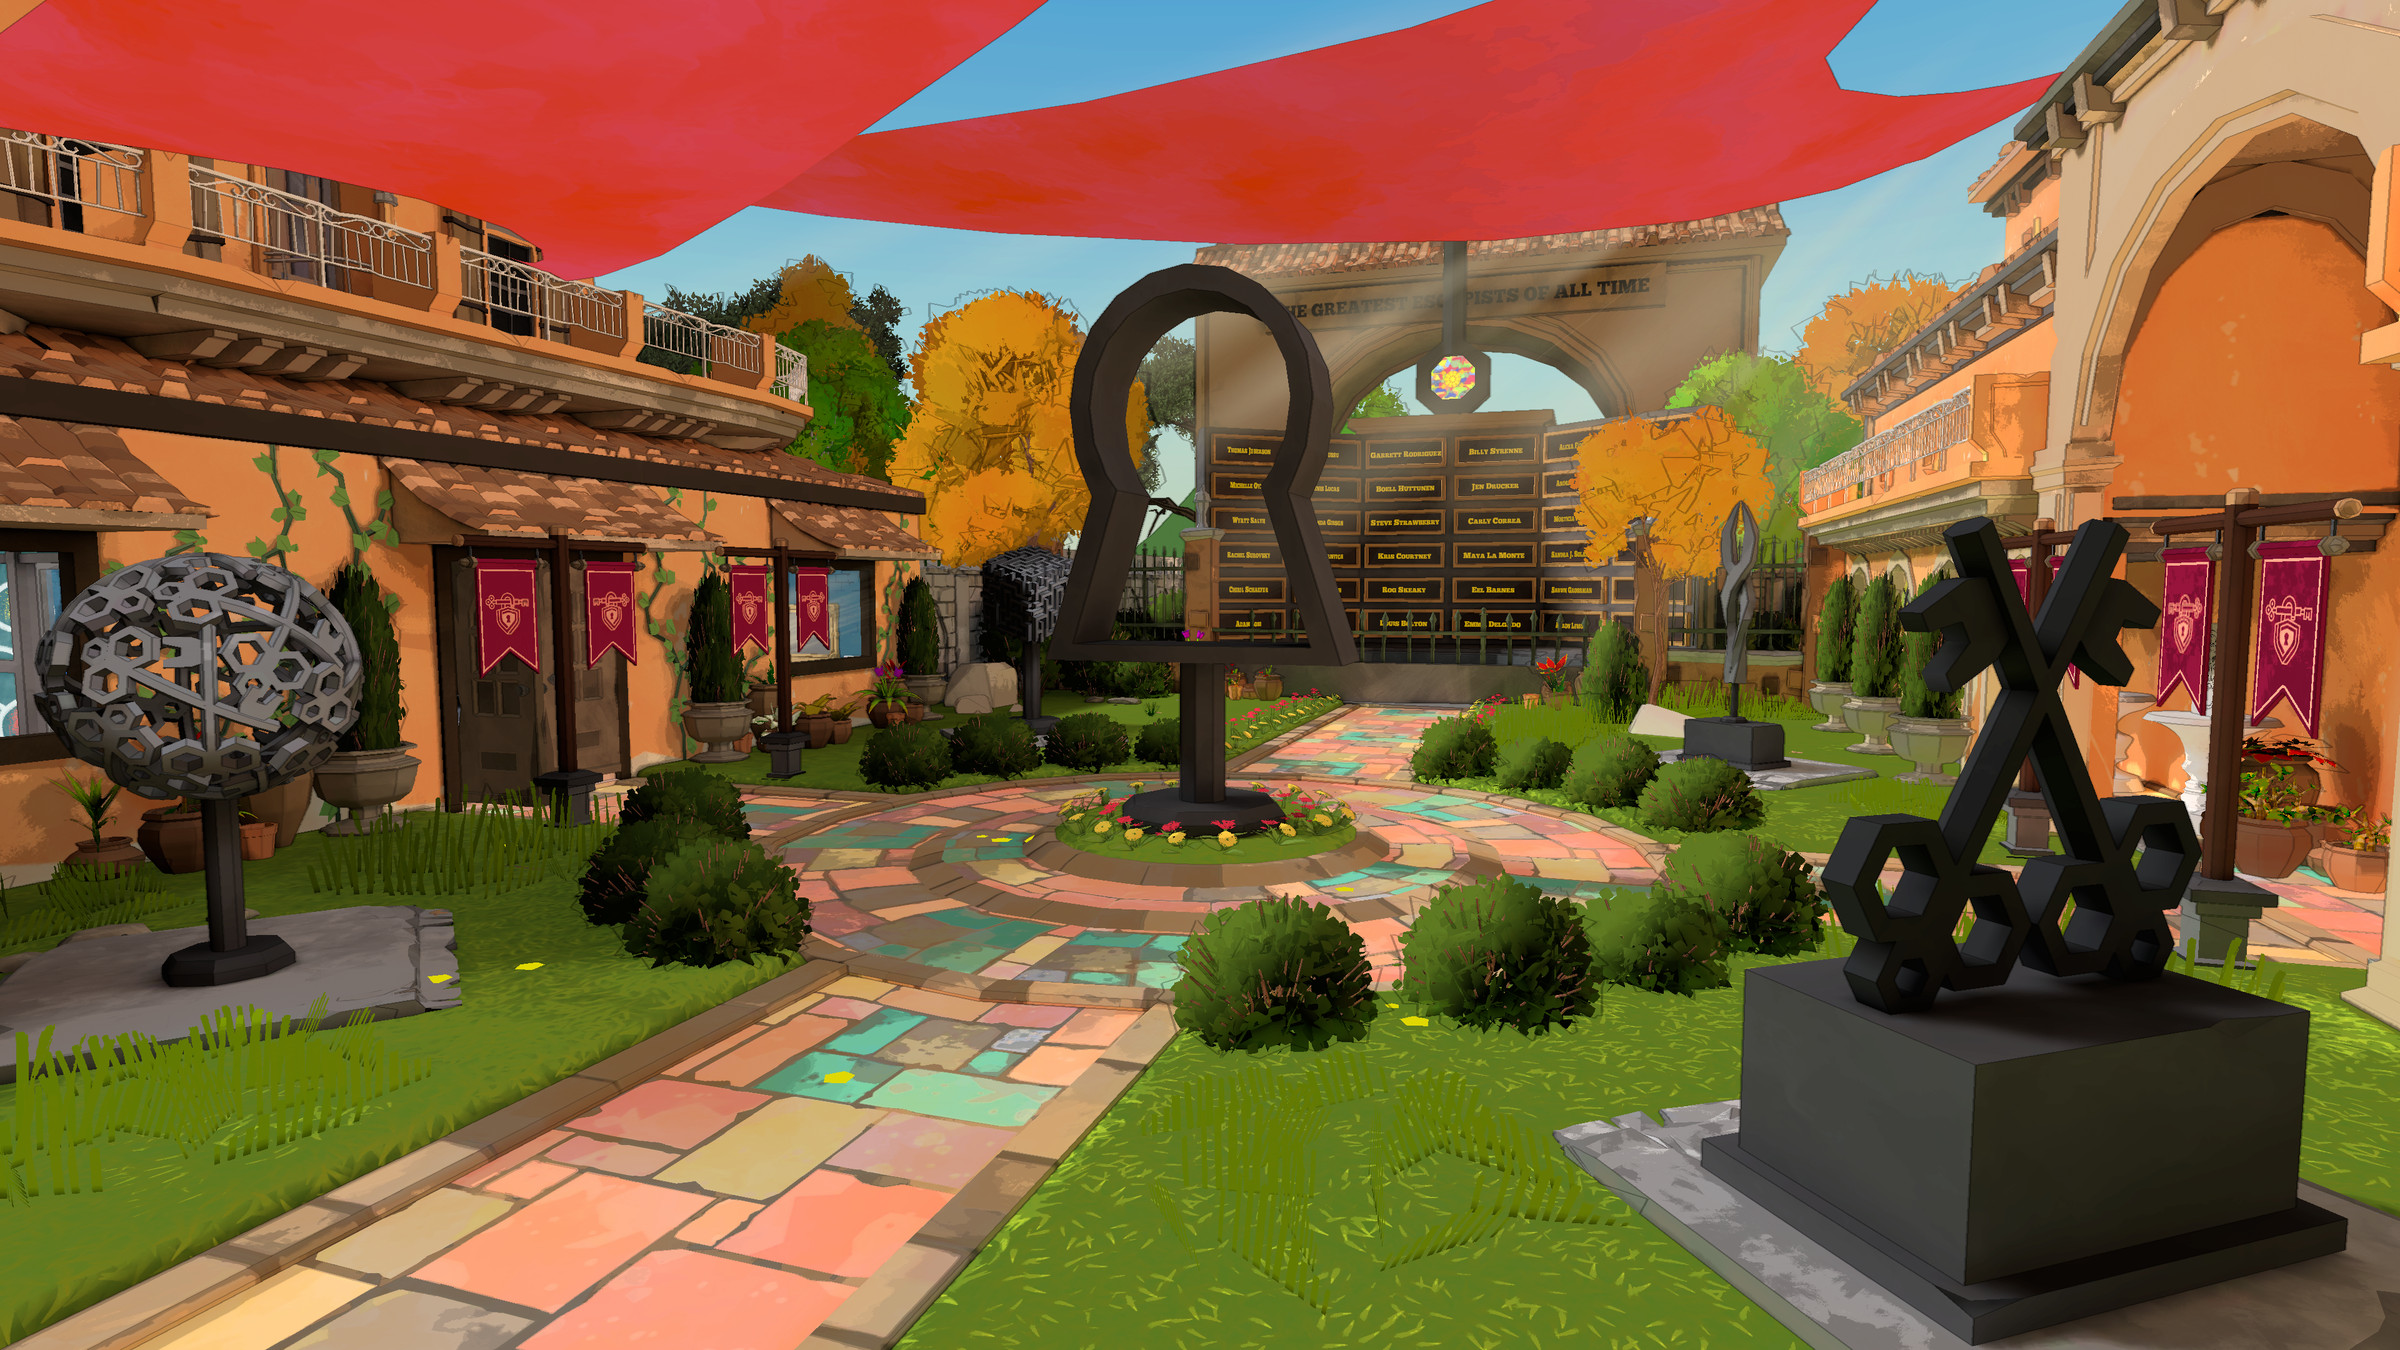 Screenshot from Escape Academy featuring an enclosed outdoor area littered with statues that are also puzzle clues.